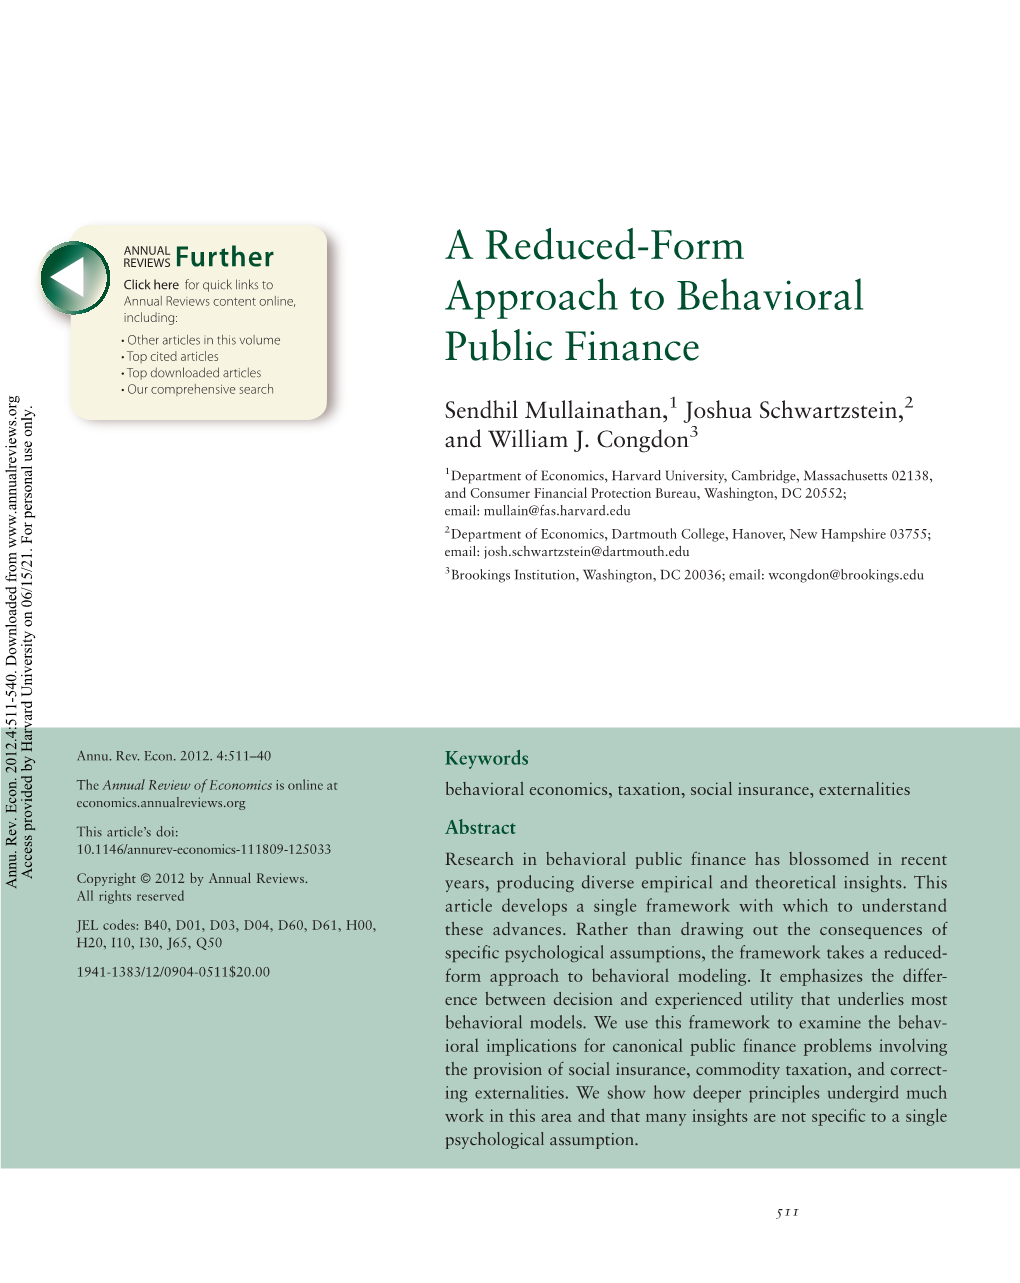 A Reduced-Form Approach to Behavioral Public Finance